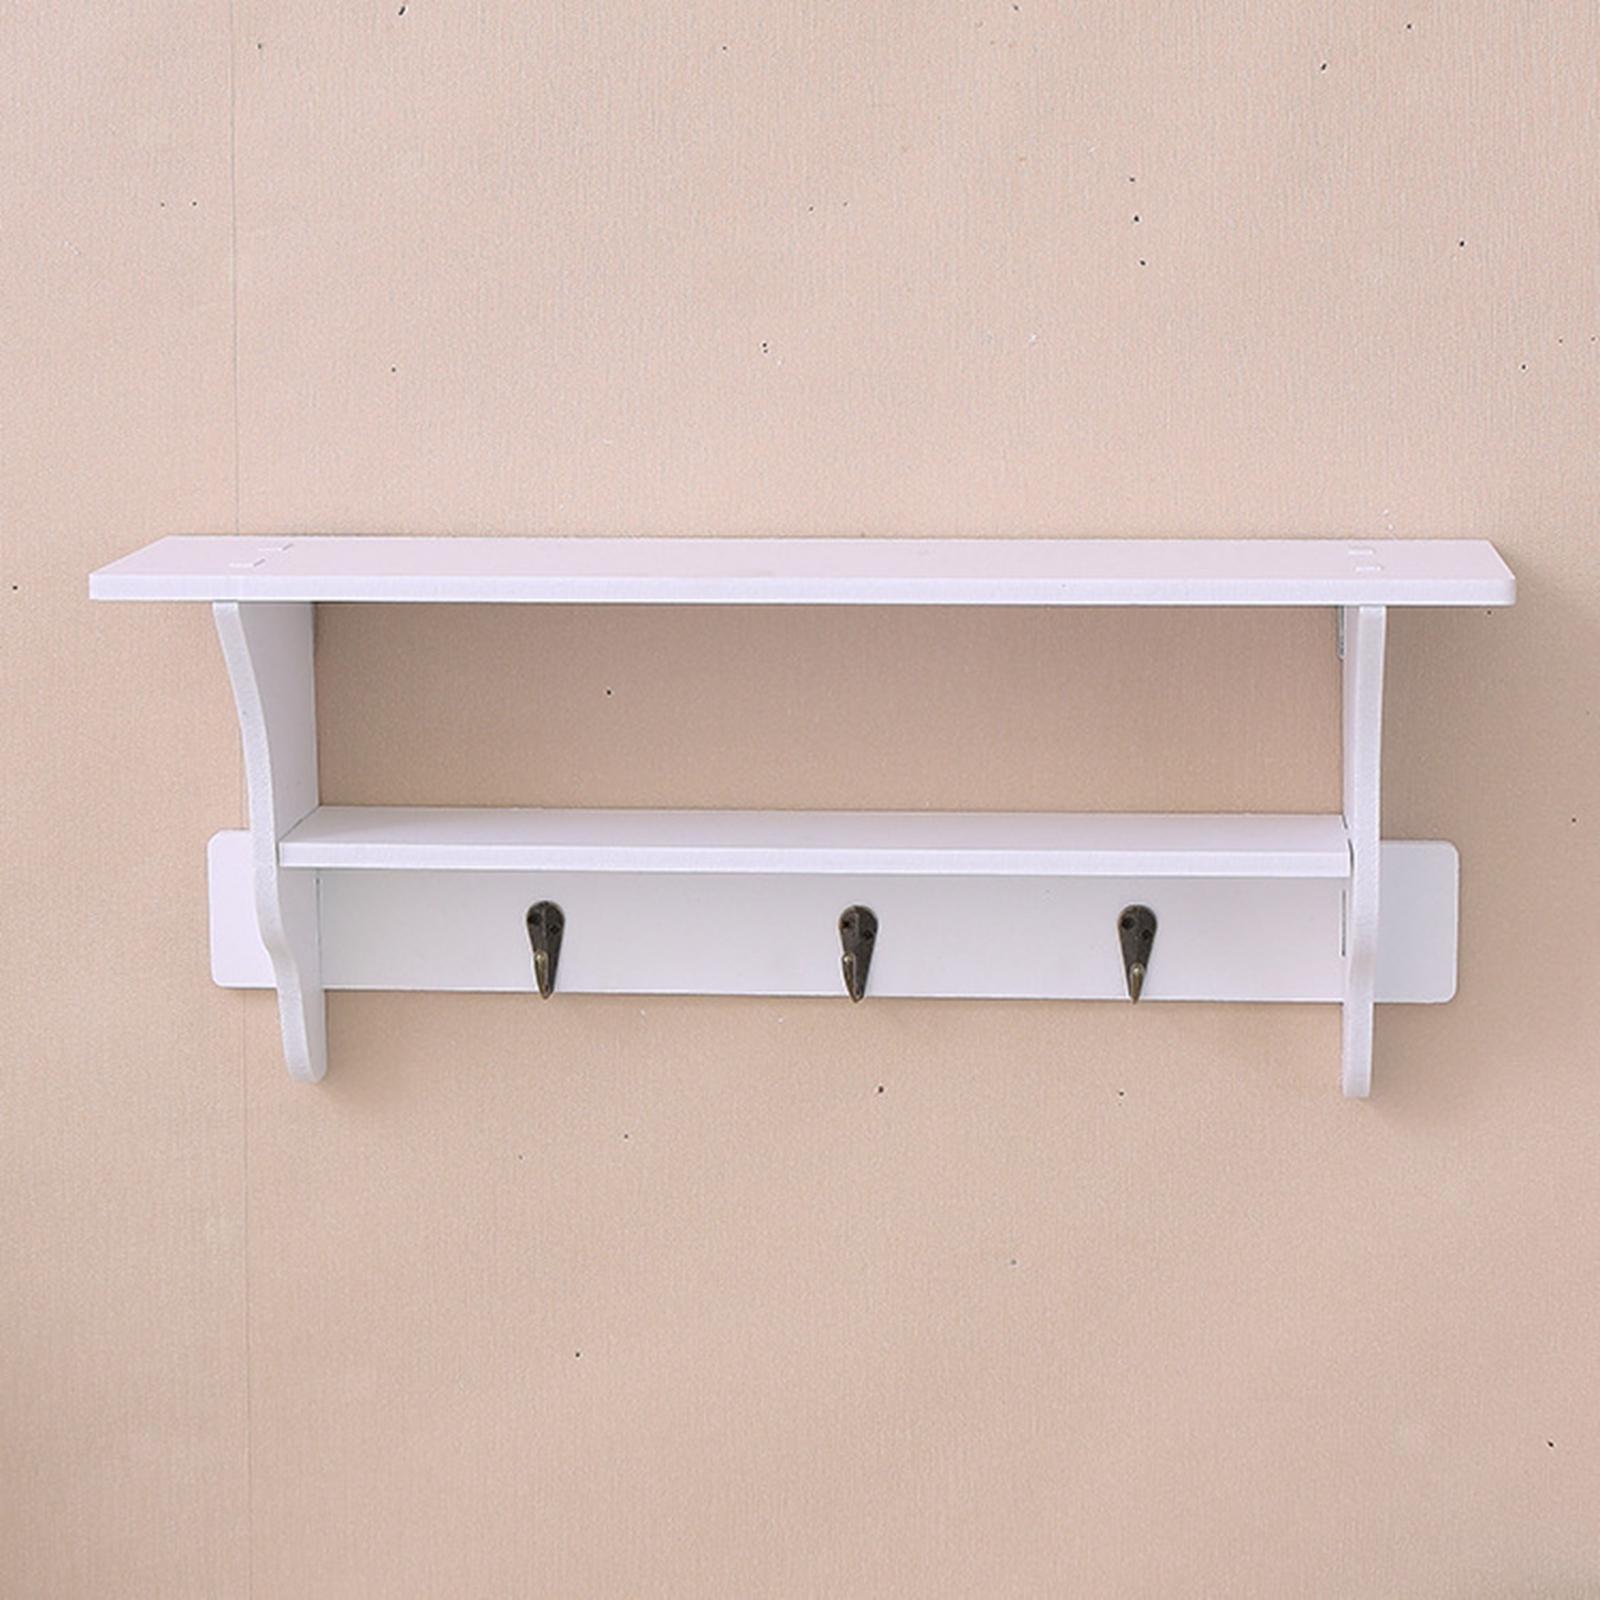 Wood Wall Mounted Hooks with Shelf | HOG-Home. office. Garden online marketplace